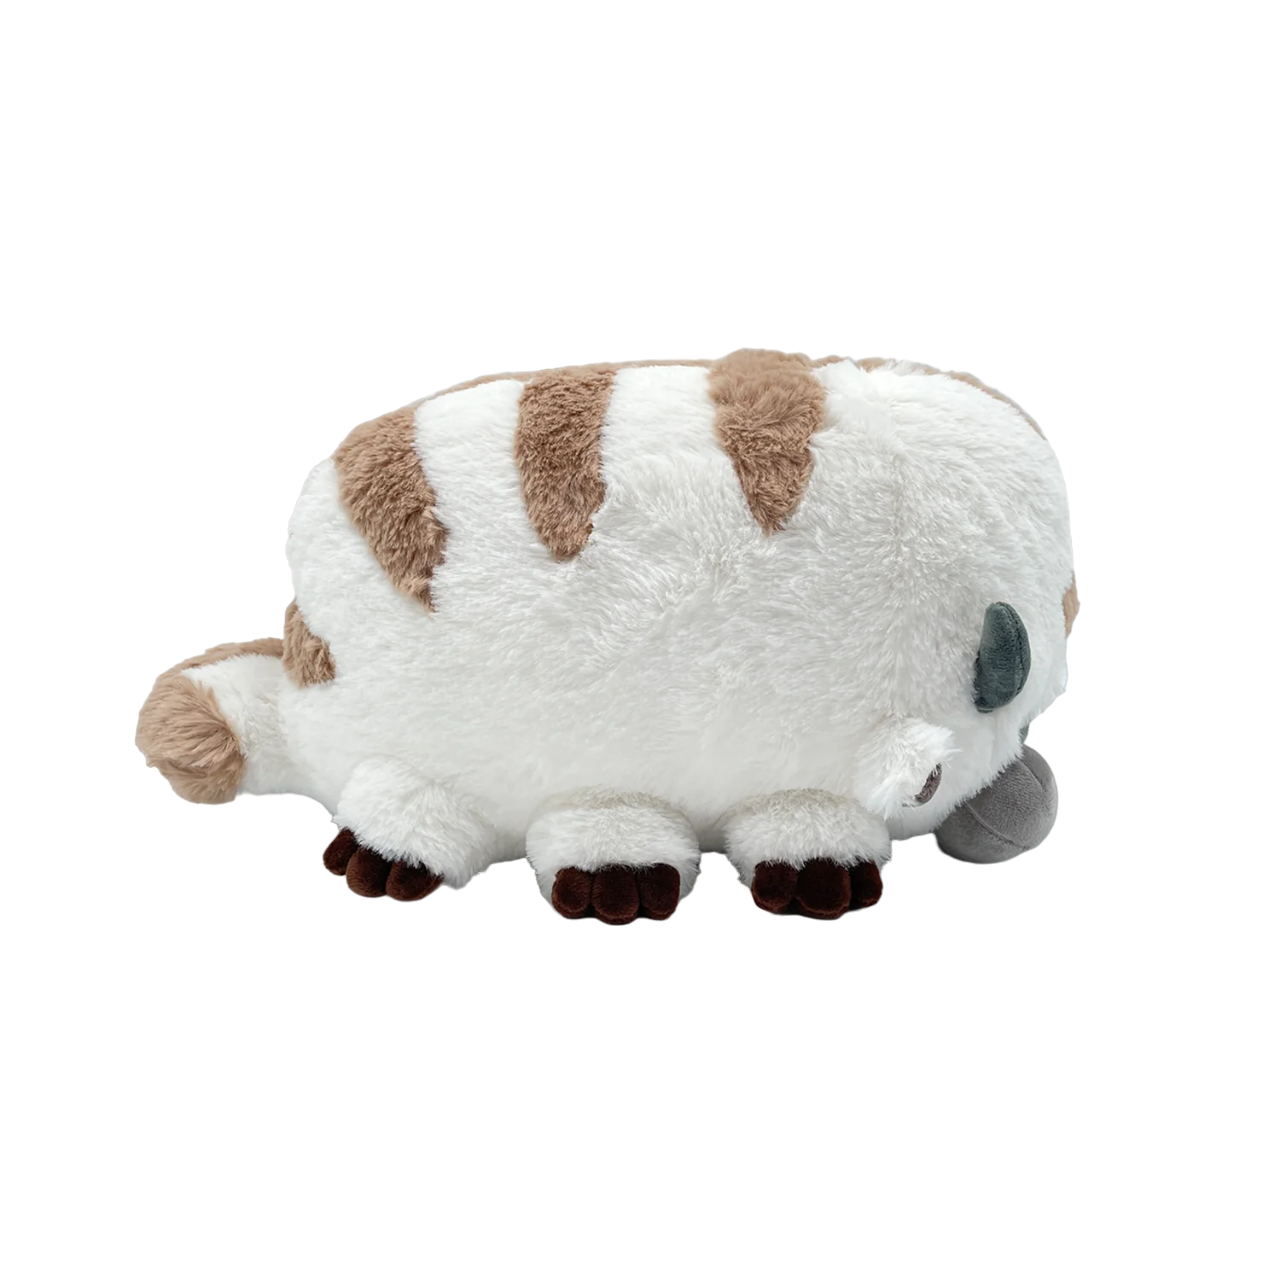 Avatar The Last Airbender Appa Youtooz Pillow (1FT)